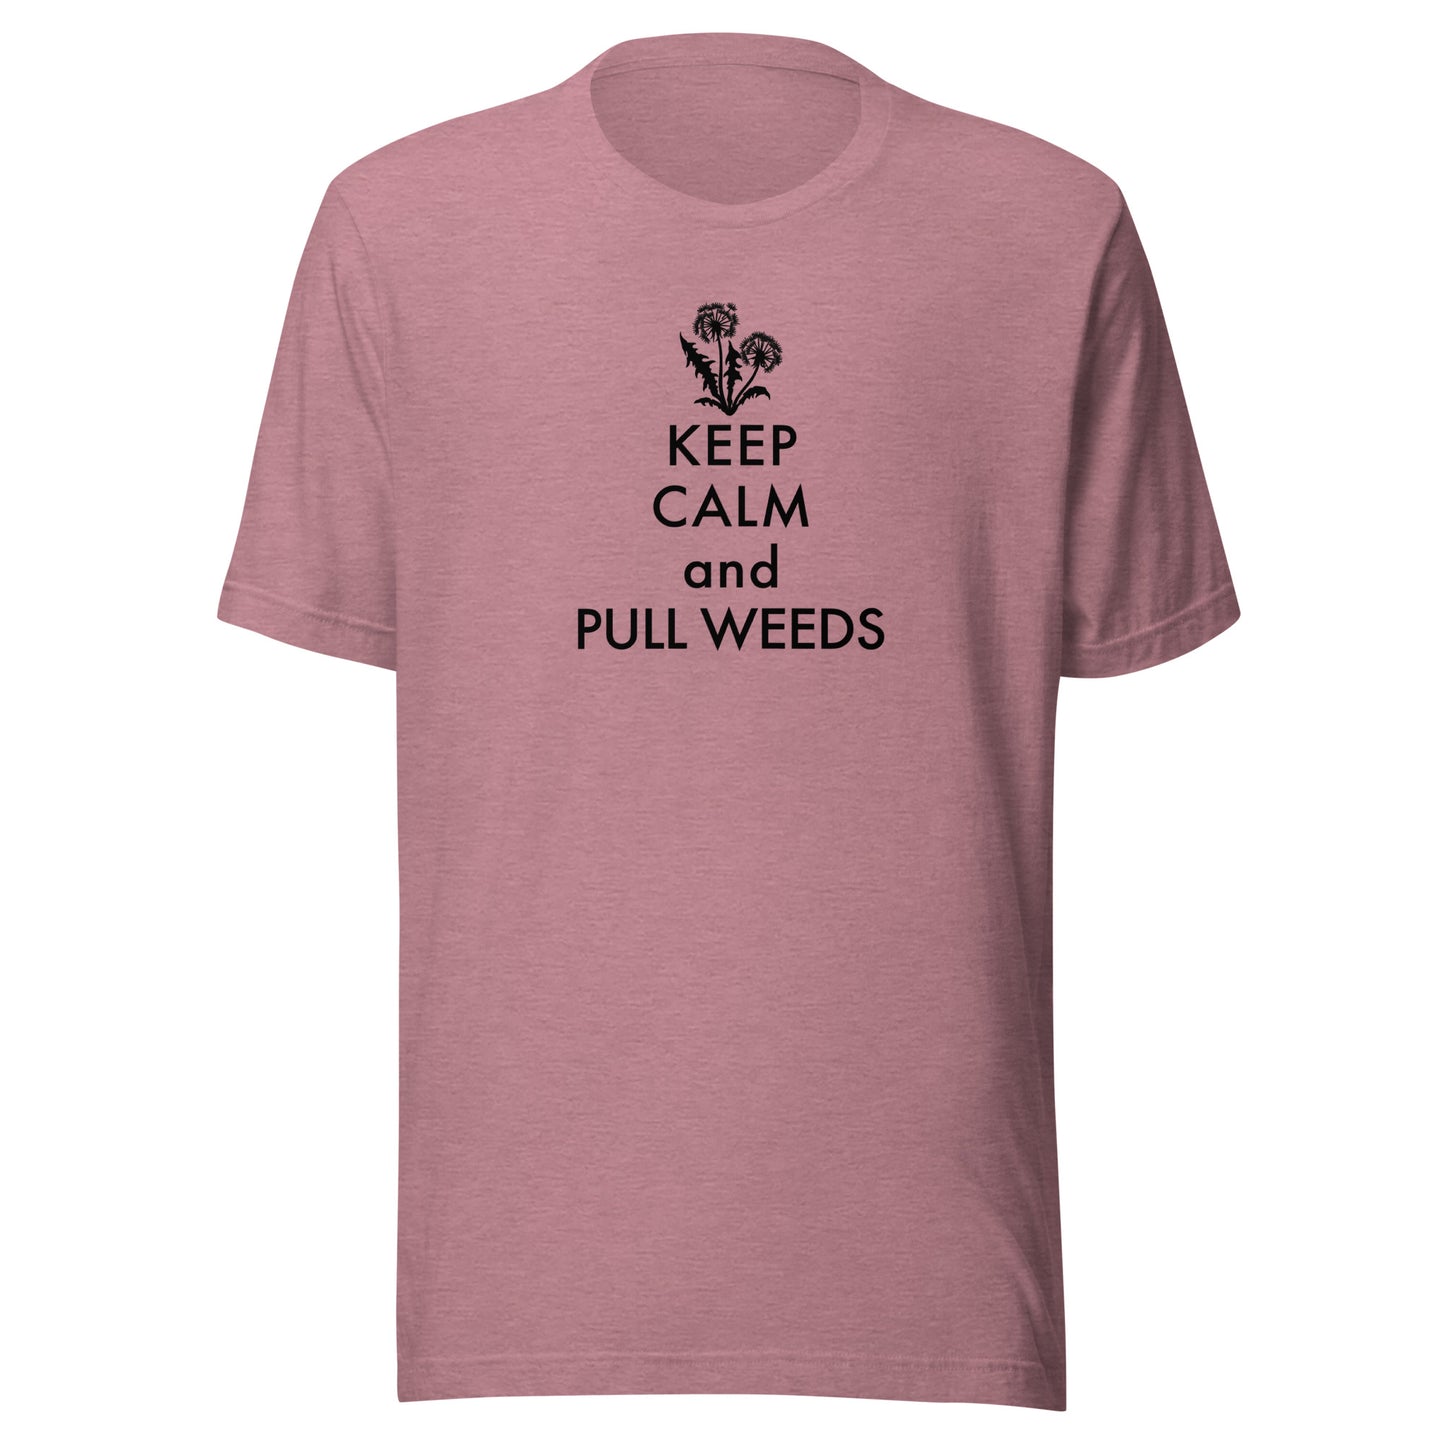 Retro Keep Calm and Pull Weeds Unisex t-shirt